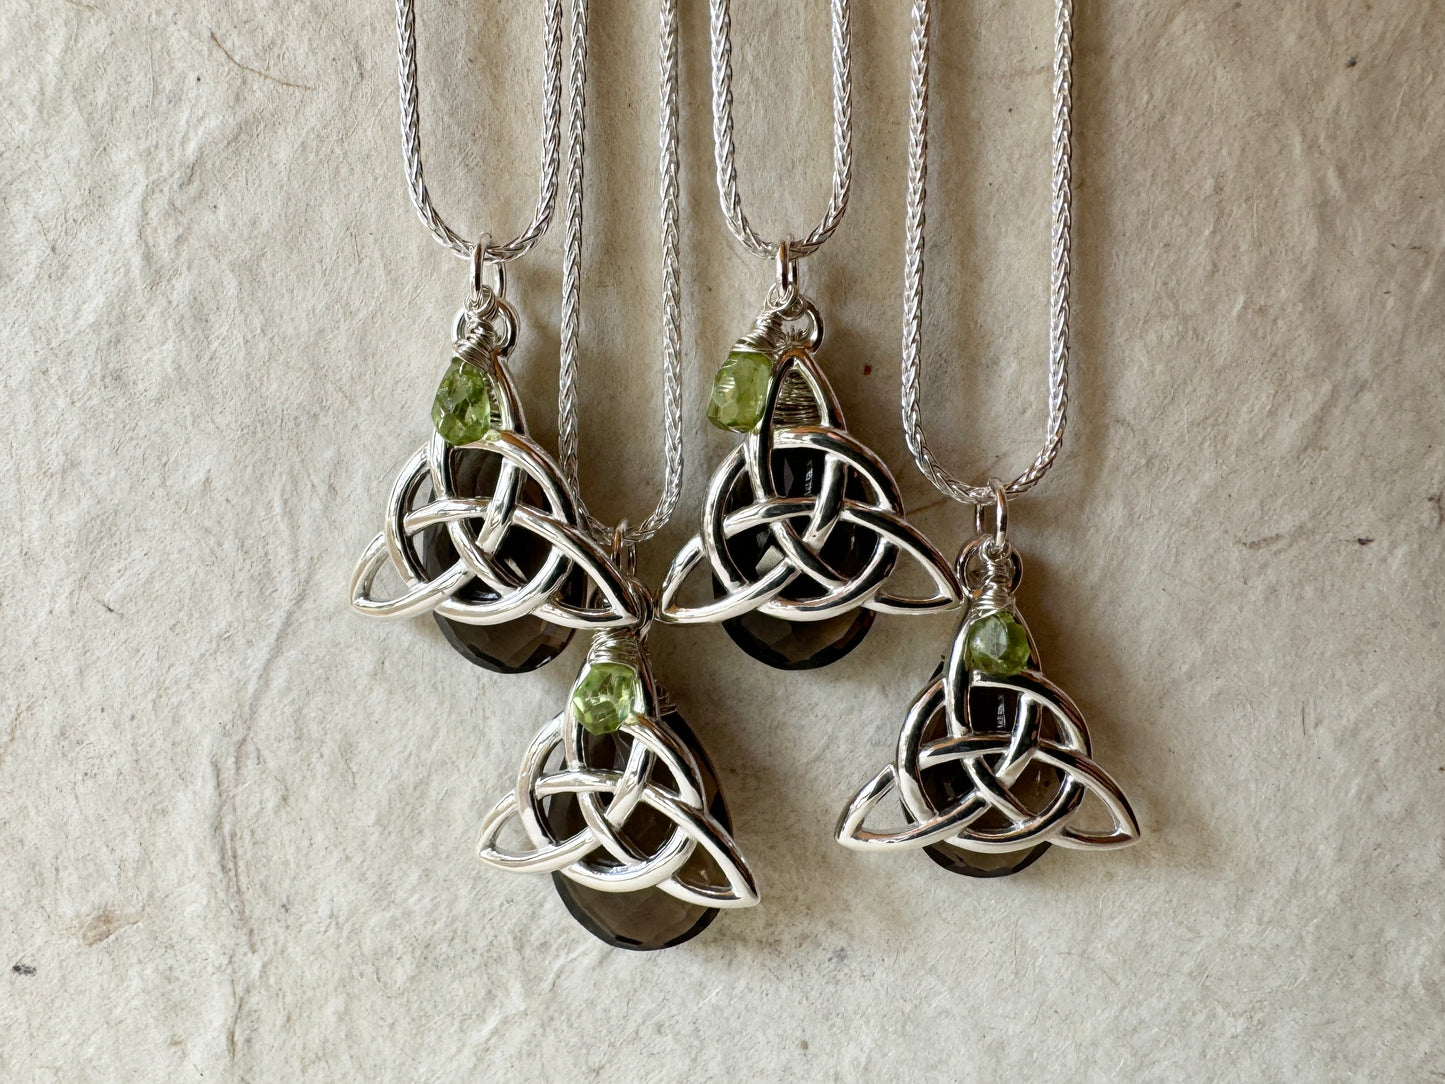 Gemstone Trinity Knot ~ Sterling Silver Charm Necklace with Smoky Quartz and Peridot Sacred Symbols Series